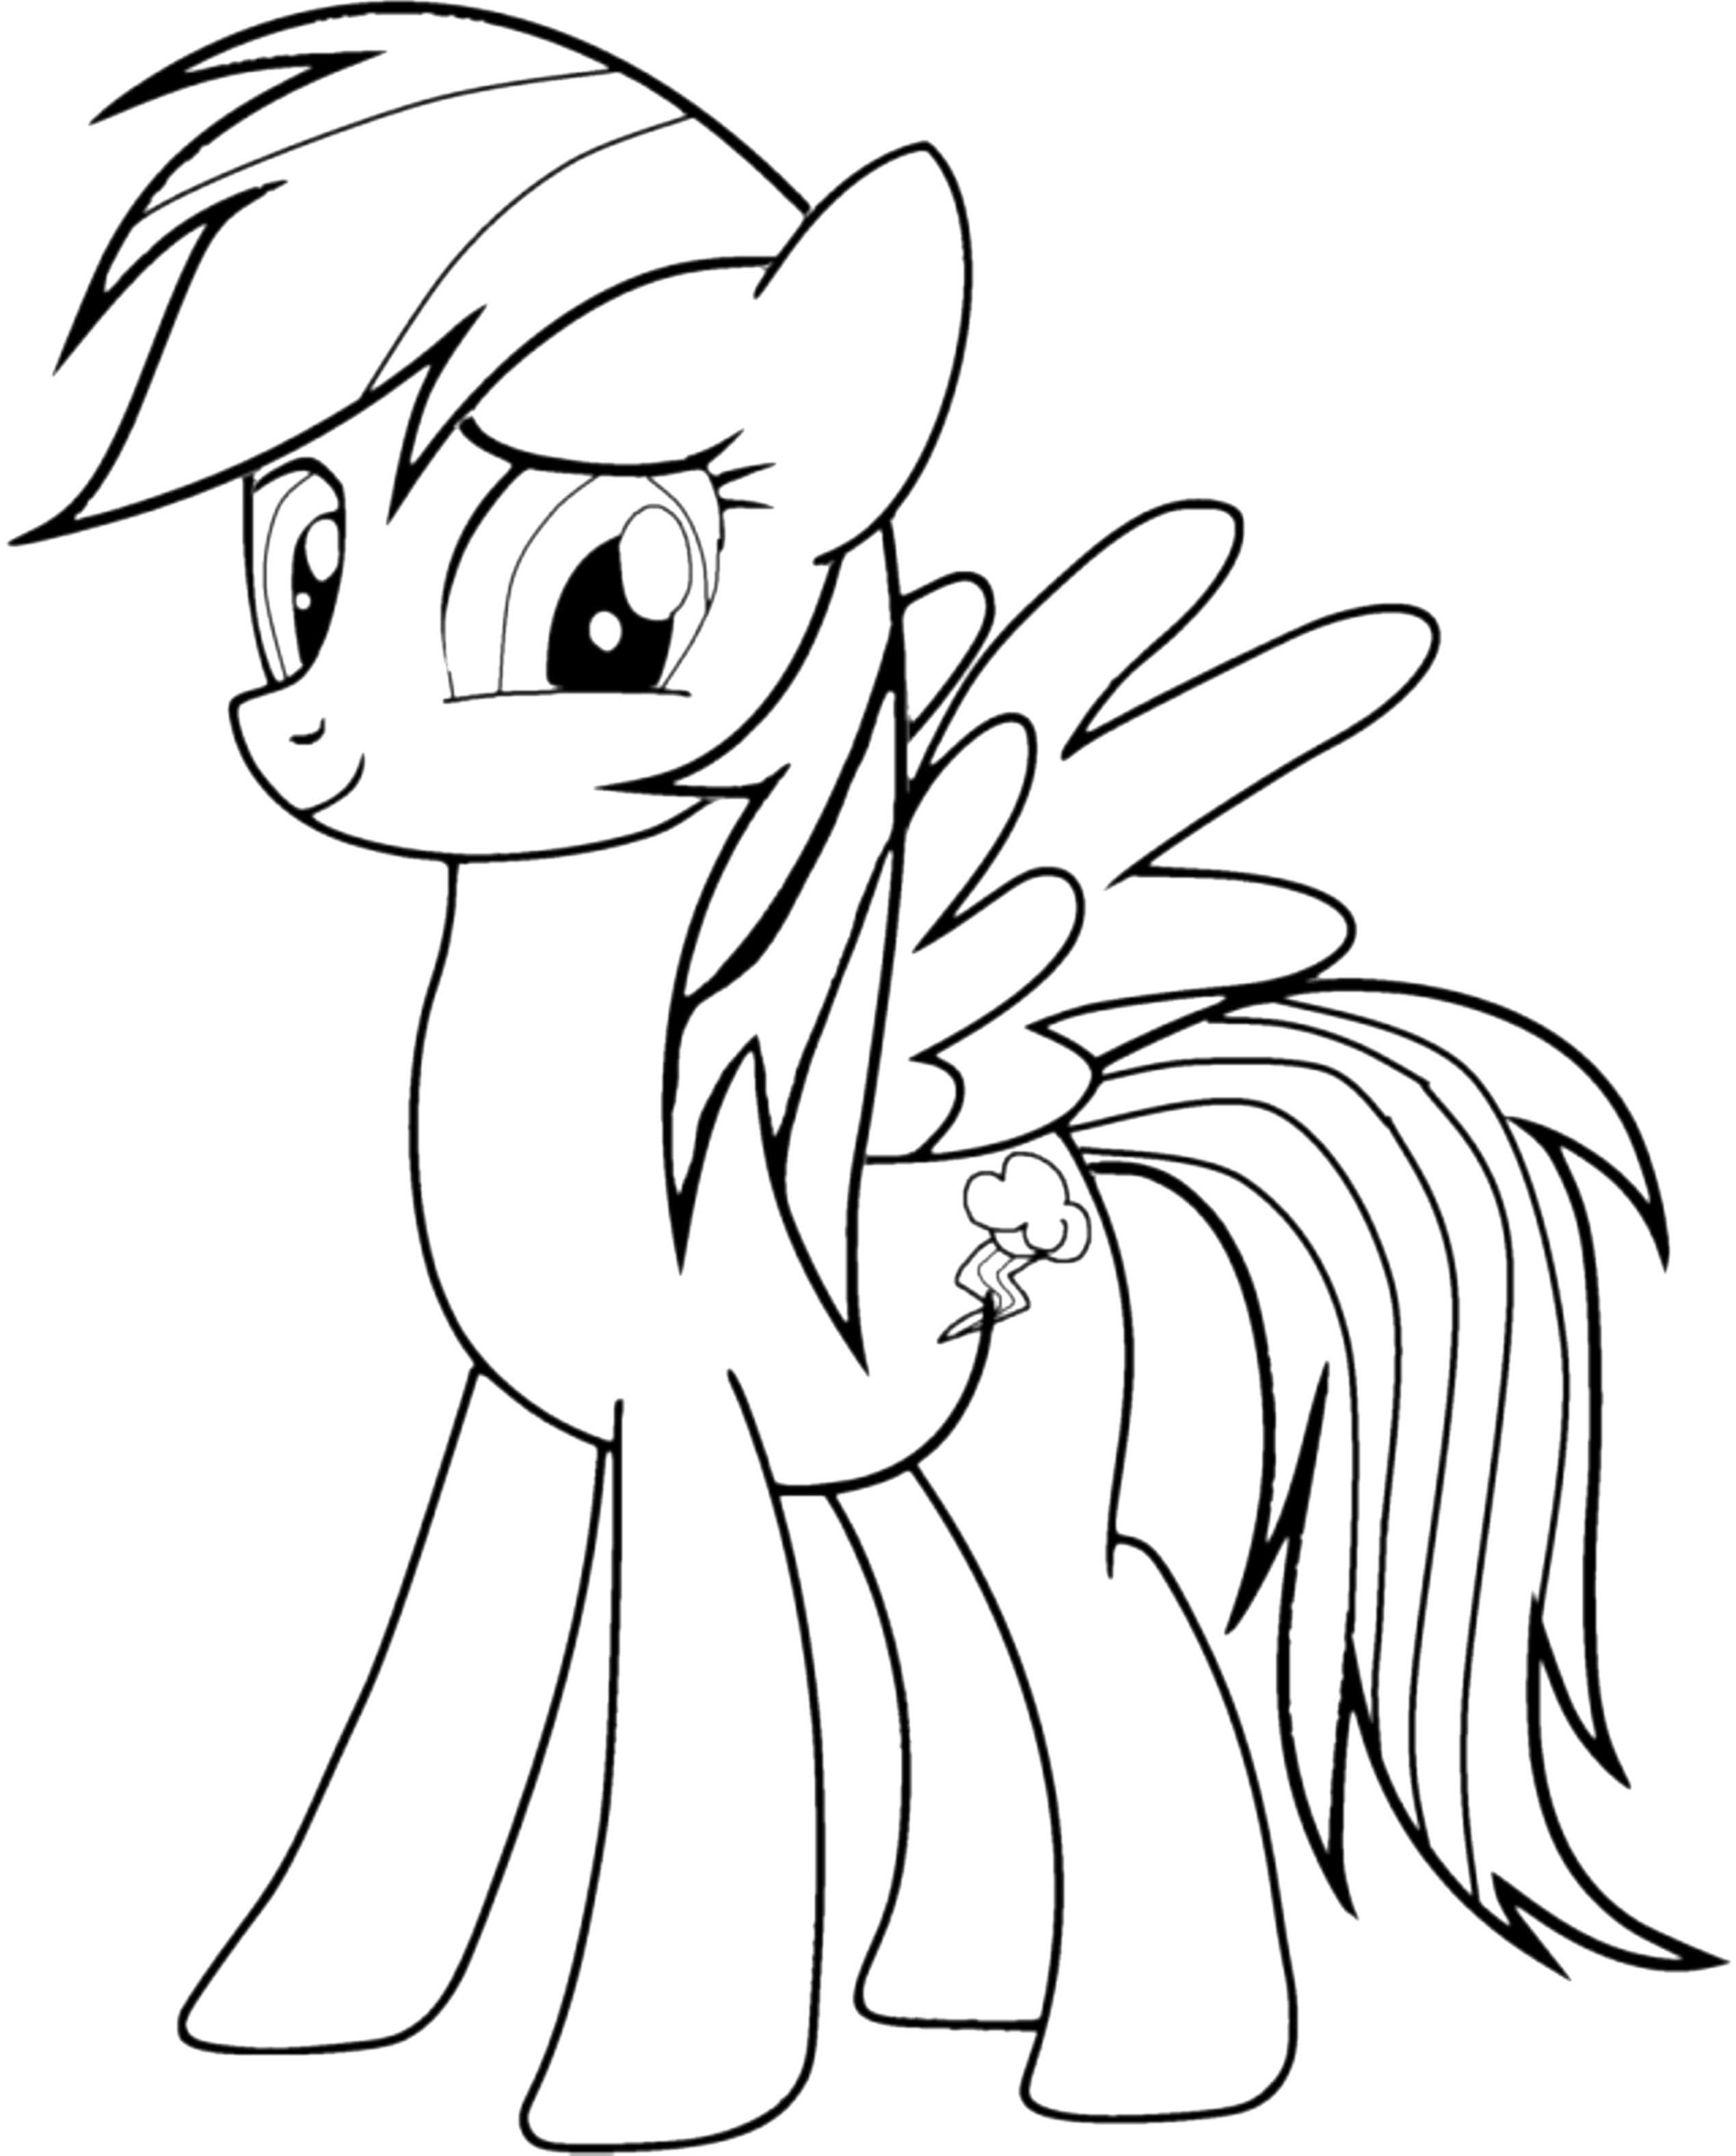 Rainbow Dash Coloring Pages   Best Coloring Pages For Kids